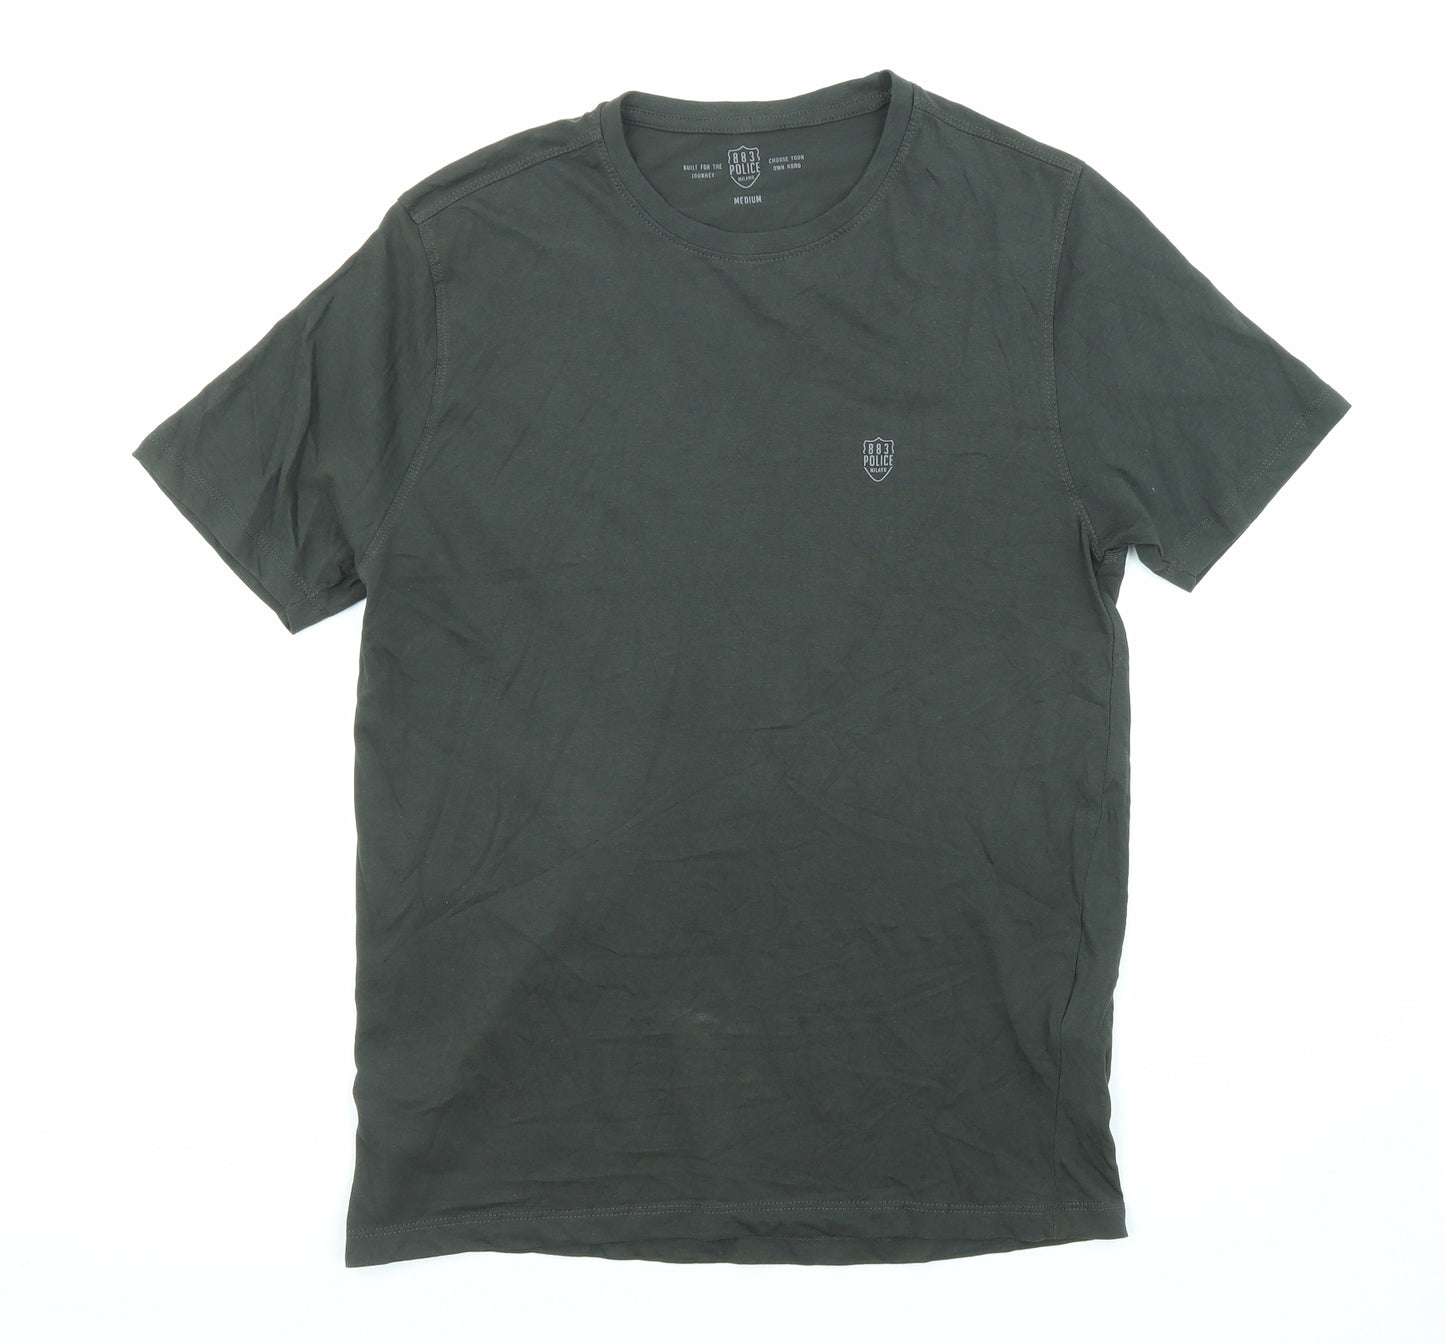 883 Police Mens Green Cotton T-Shirt Size M Crew Neck